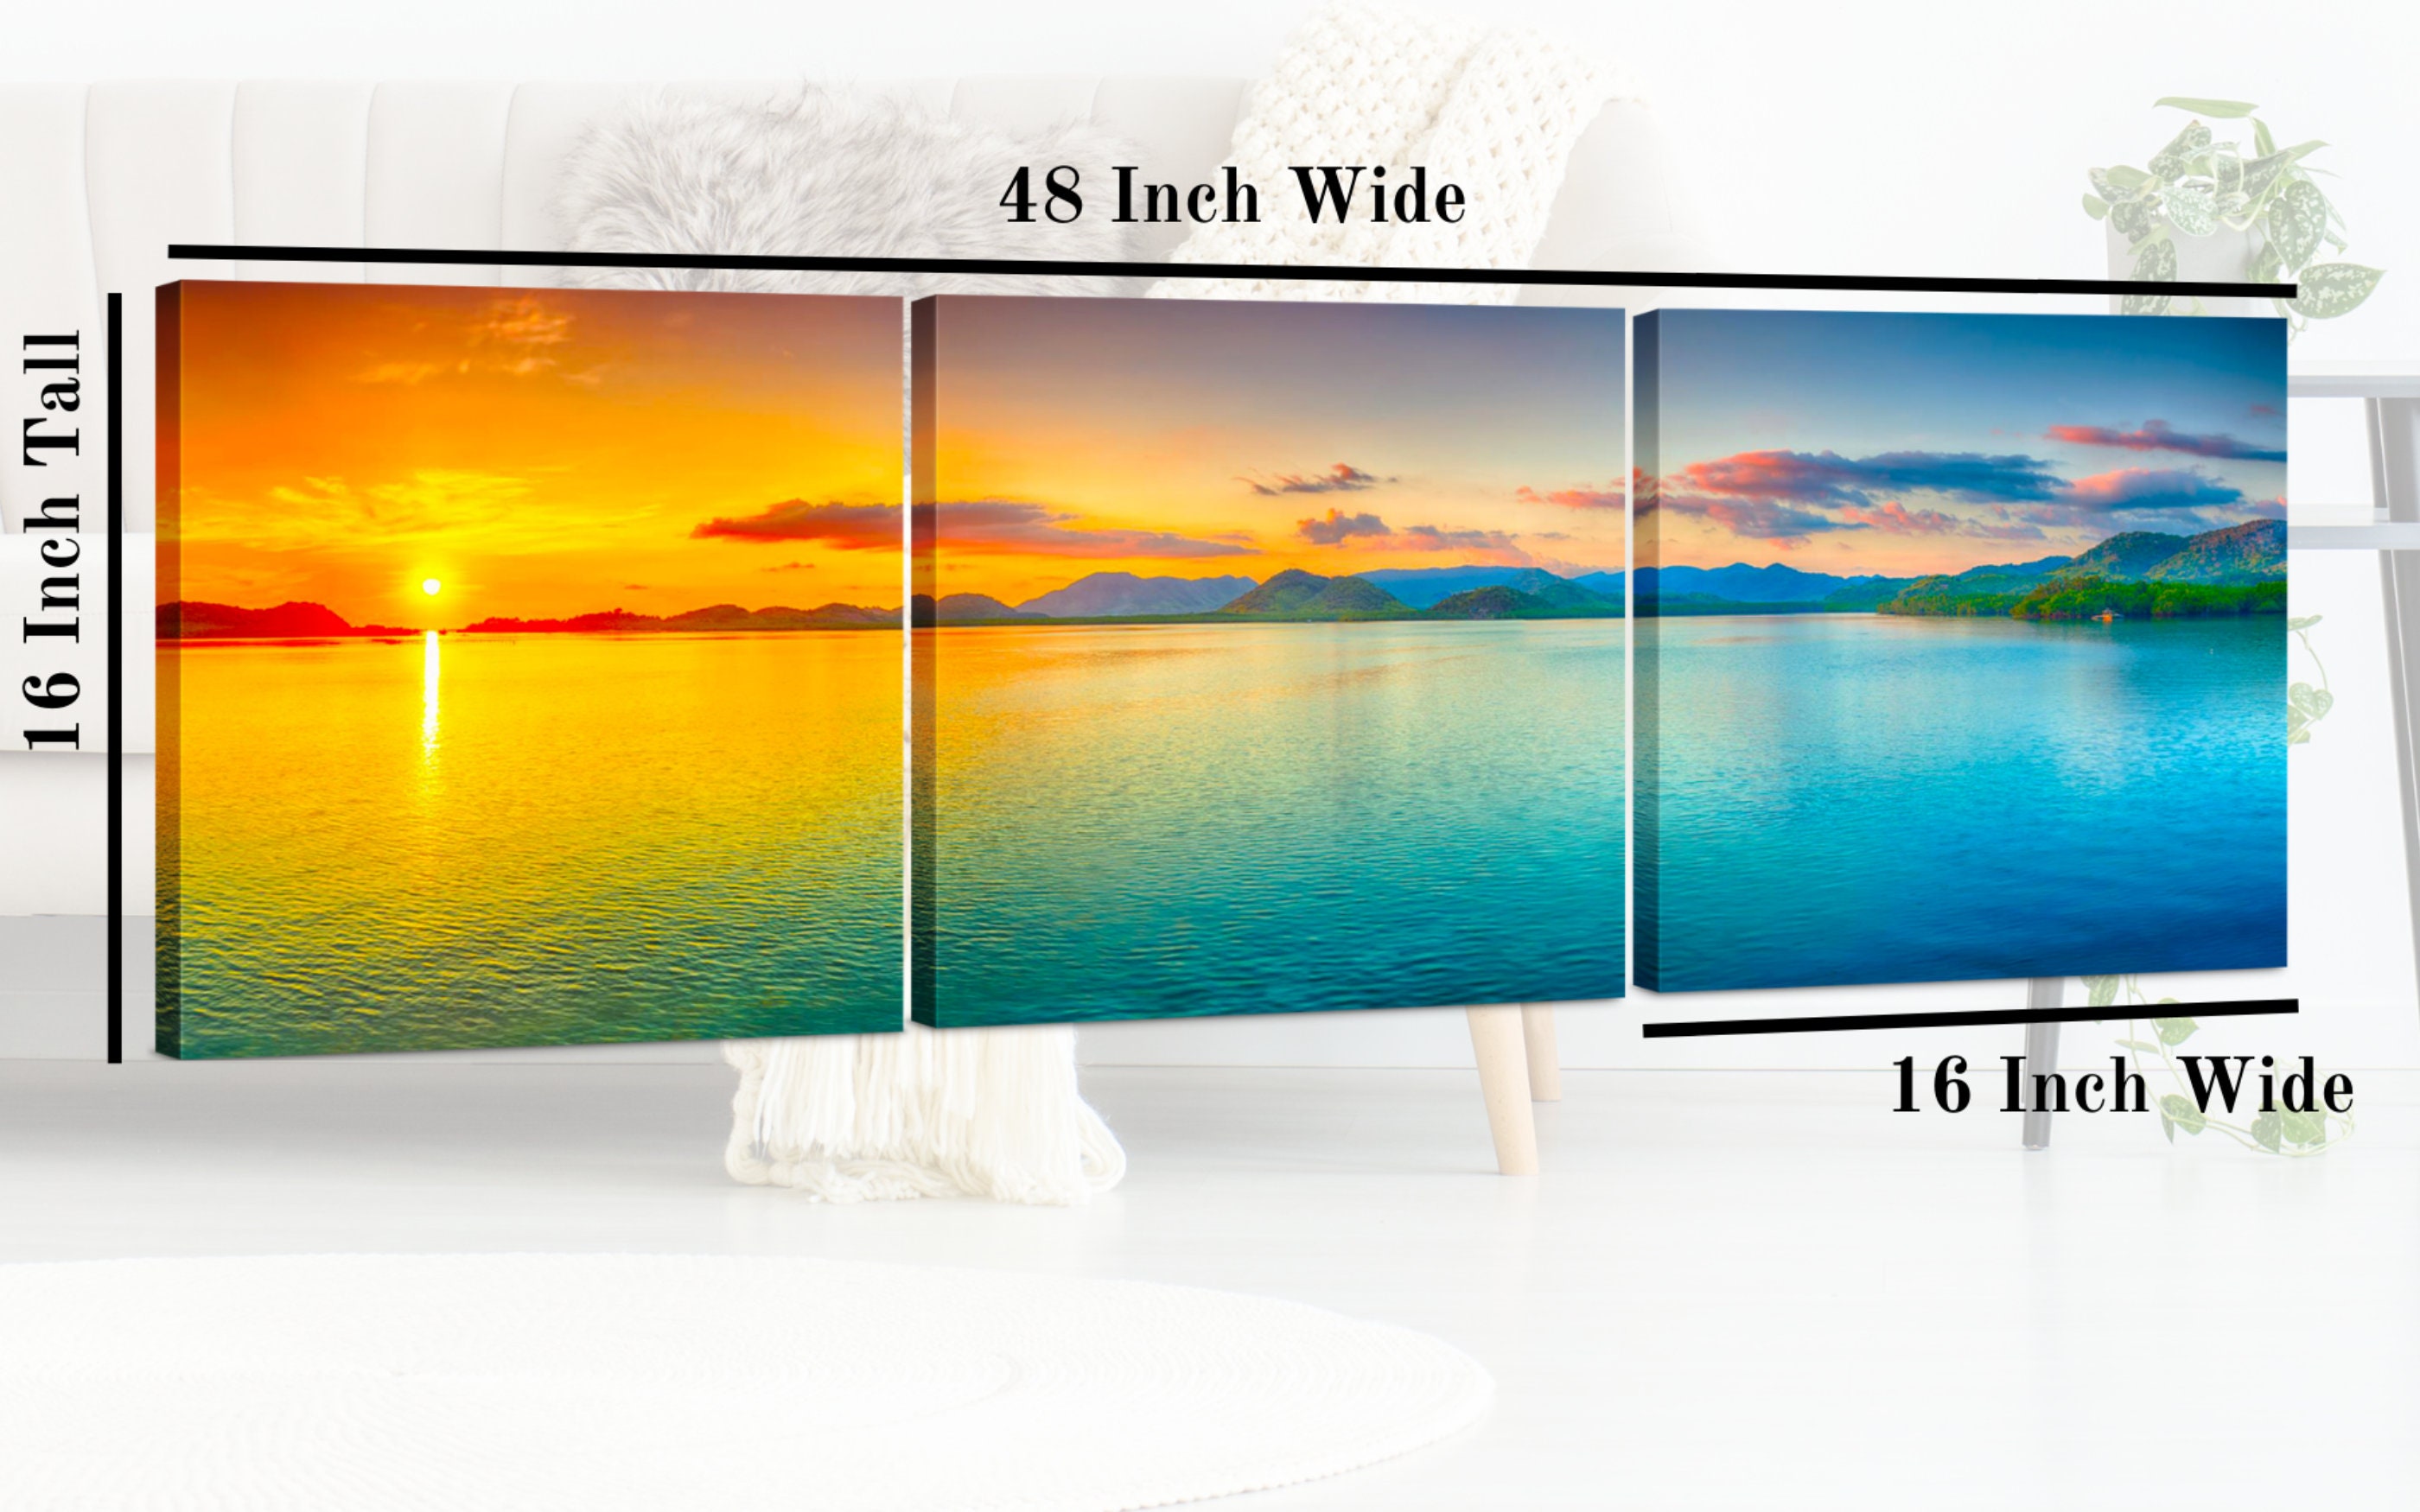 Split Canvas Wall Art Decor - Large Panoramic Sunset Ocean Wall Art, 3  Panels Hanging Canvas Art Set - Decorative Wall Art Prints for Living Room,  Bedroom, Office, Home Decor, Gift, 24x72